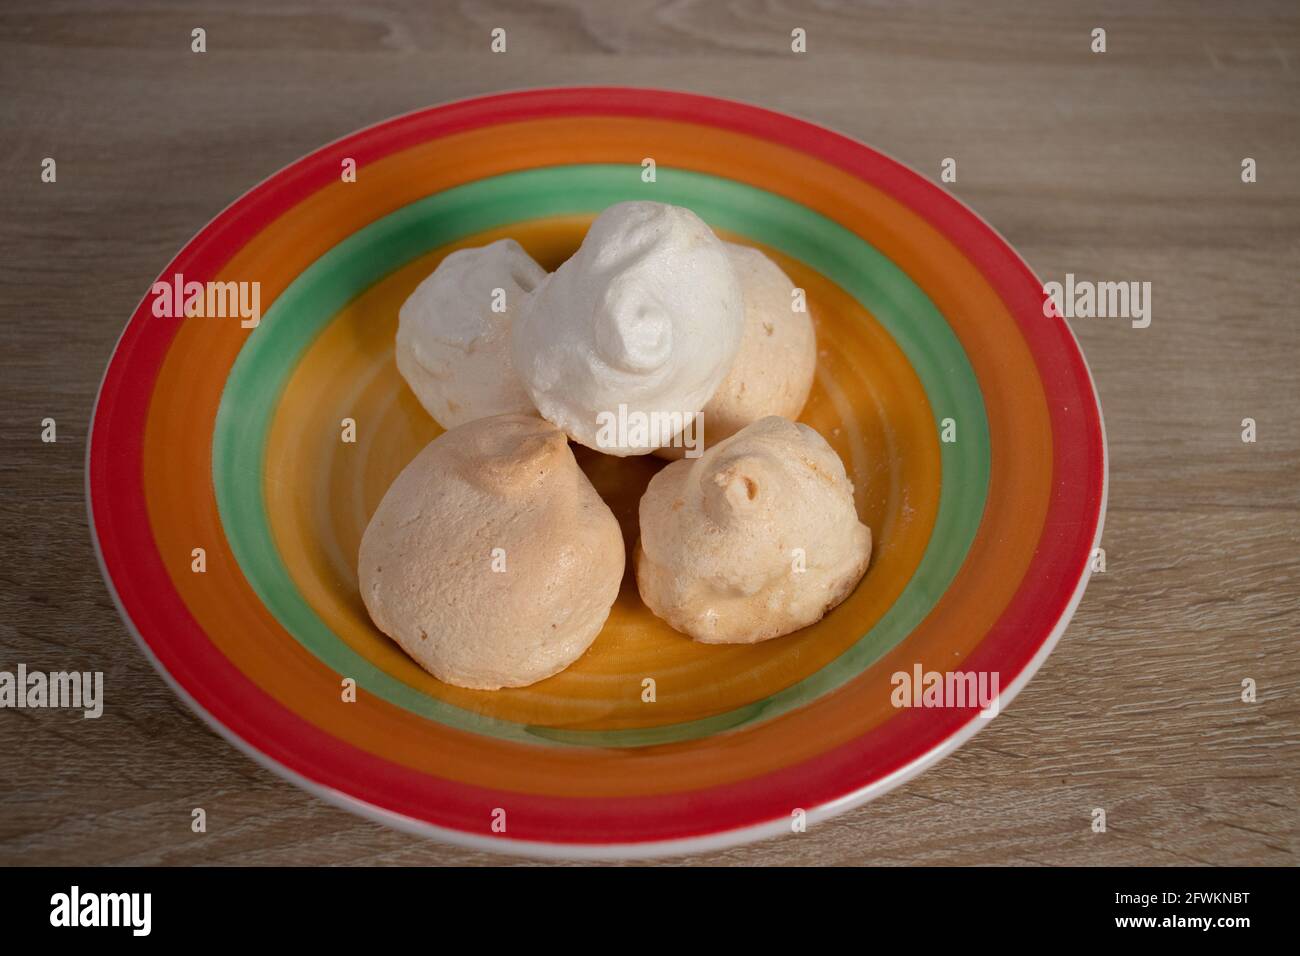 Meringues on colorful round plate. Traditional candy of meringue. Colorful bowl with meringues snacks. Stock Photo